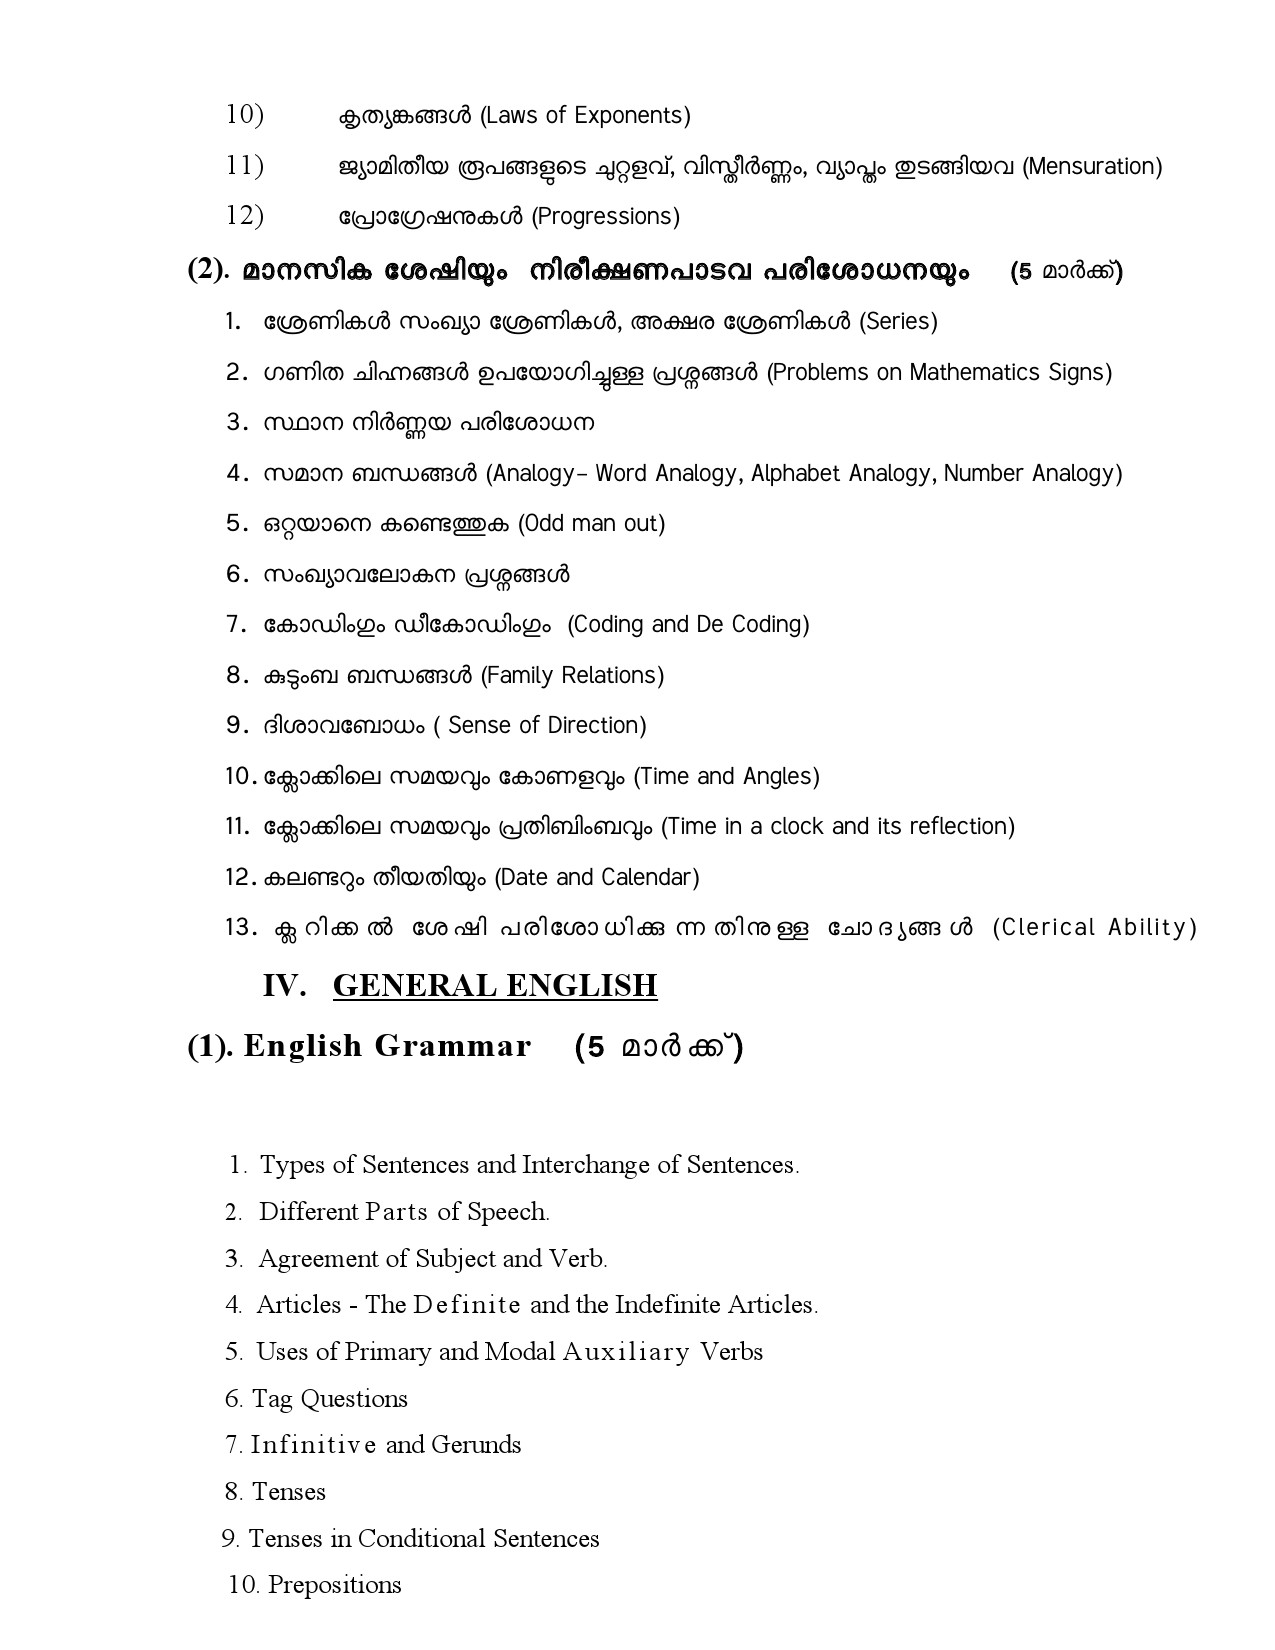 Civil Excise Officer Final Examination Syllabus For Plus Two Level - Notification Image 8